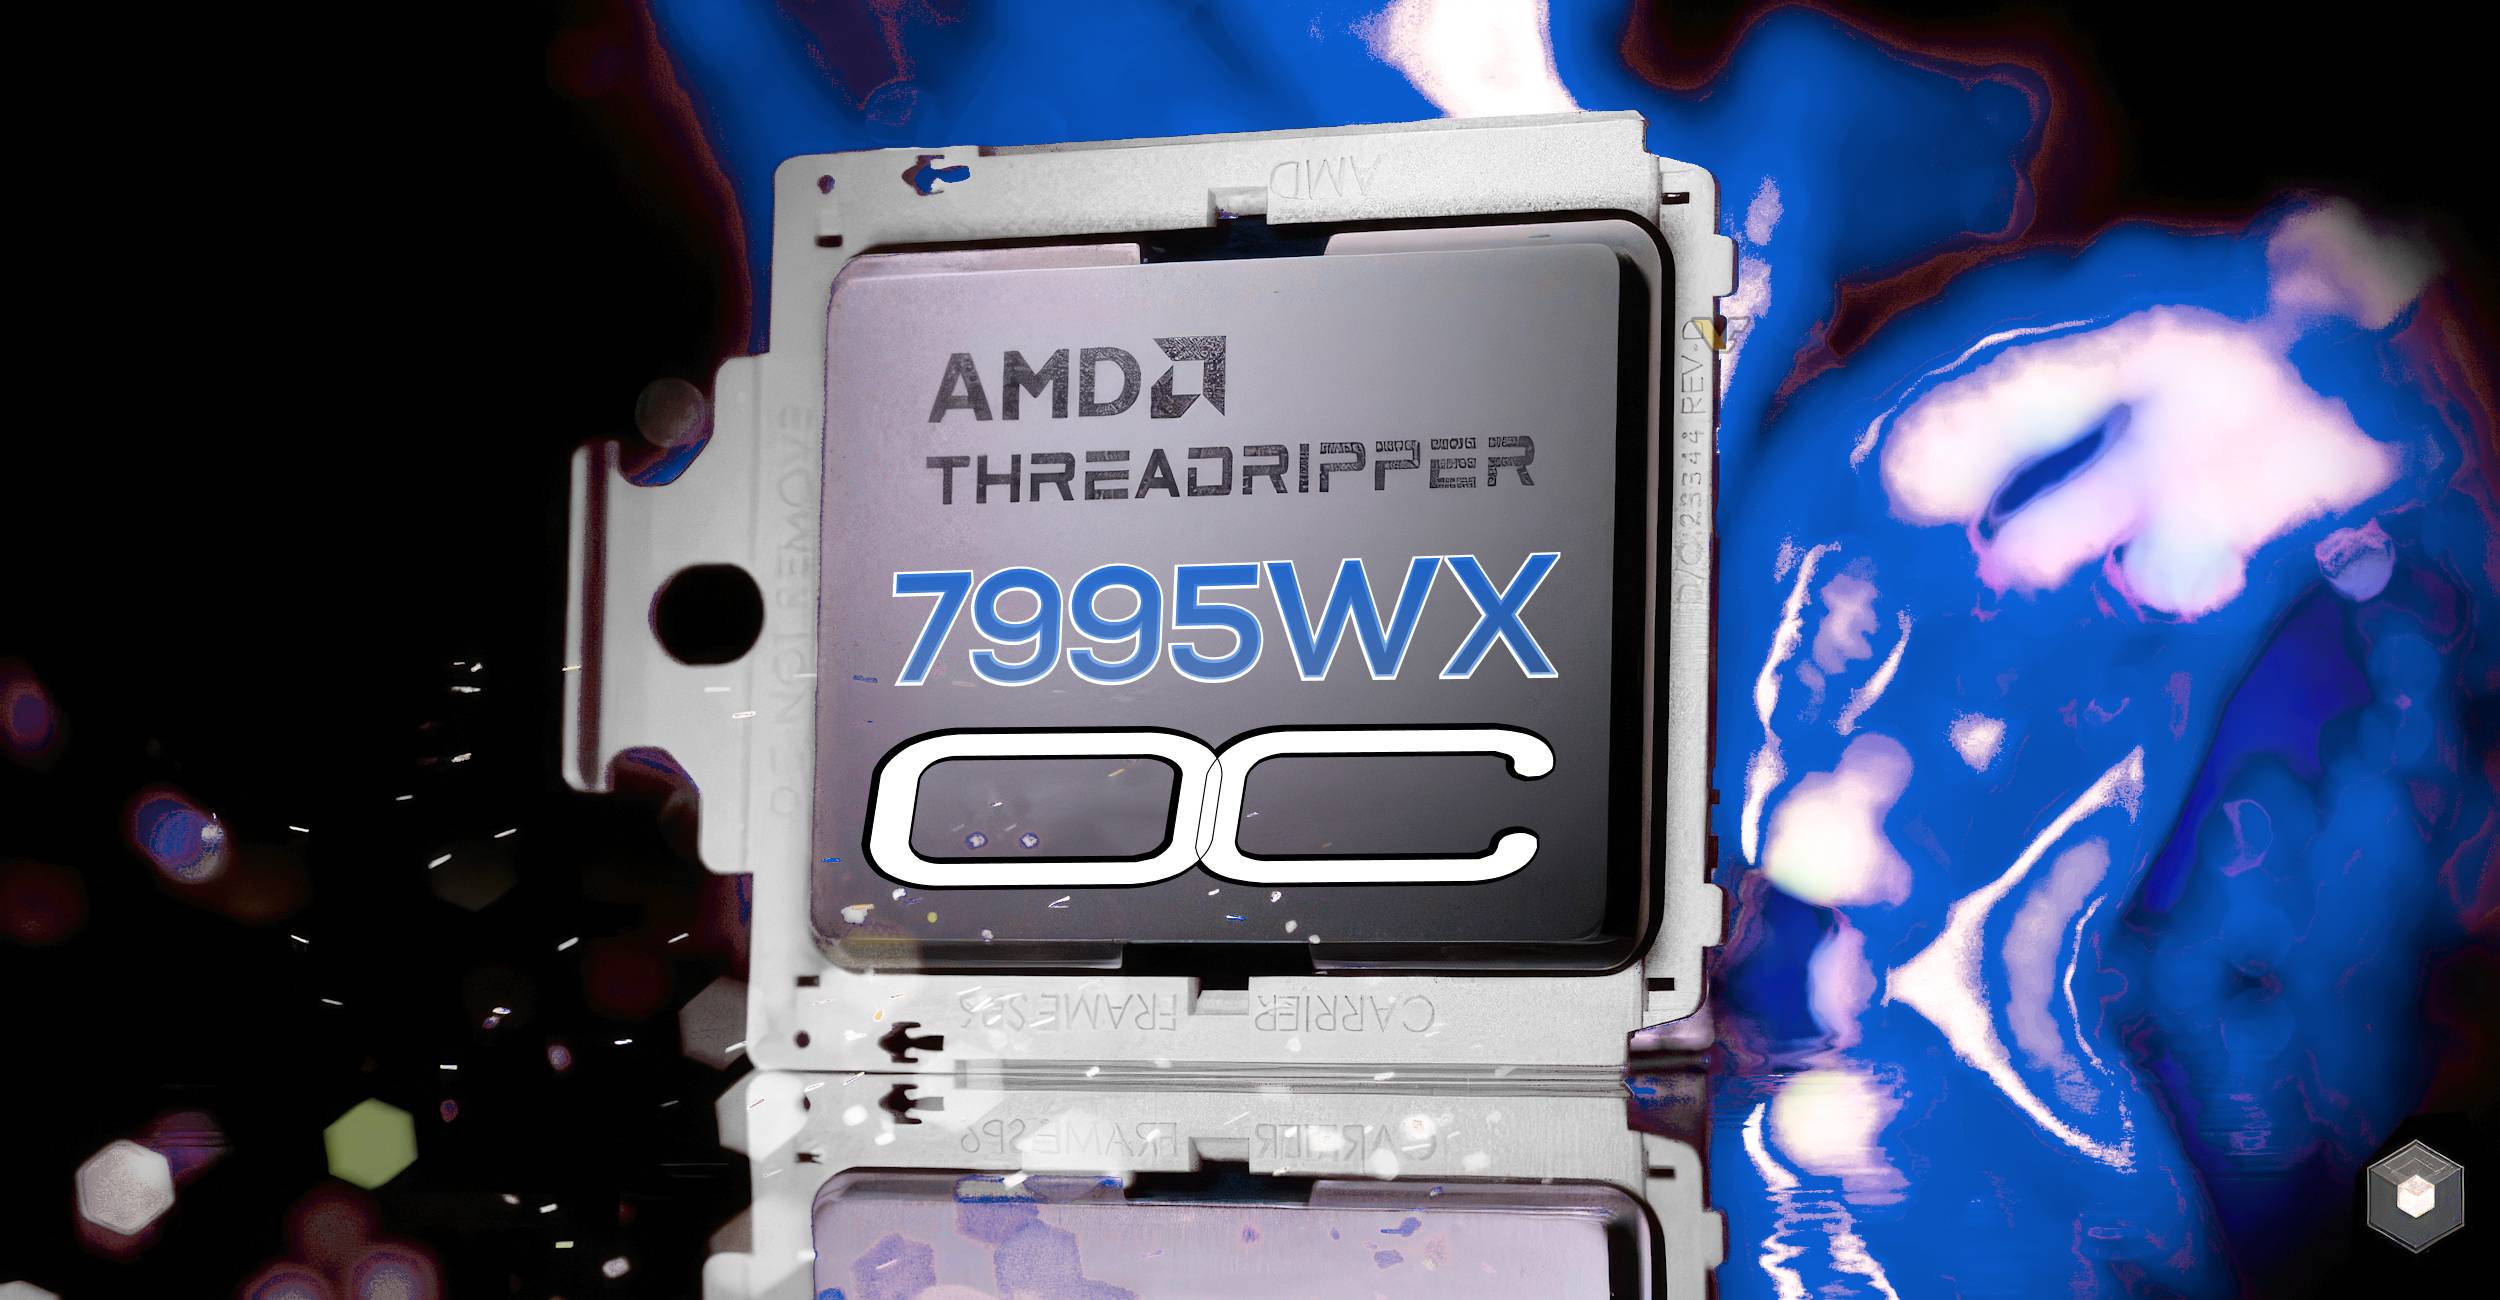 AMD claims overclocked Threadripper PRO 7995WX can achieve 184K